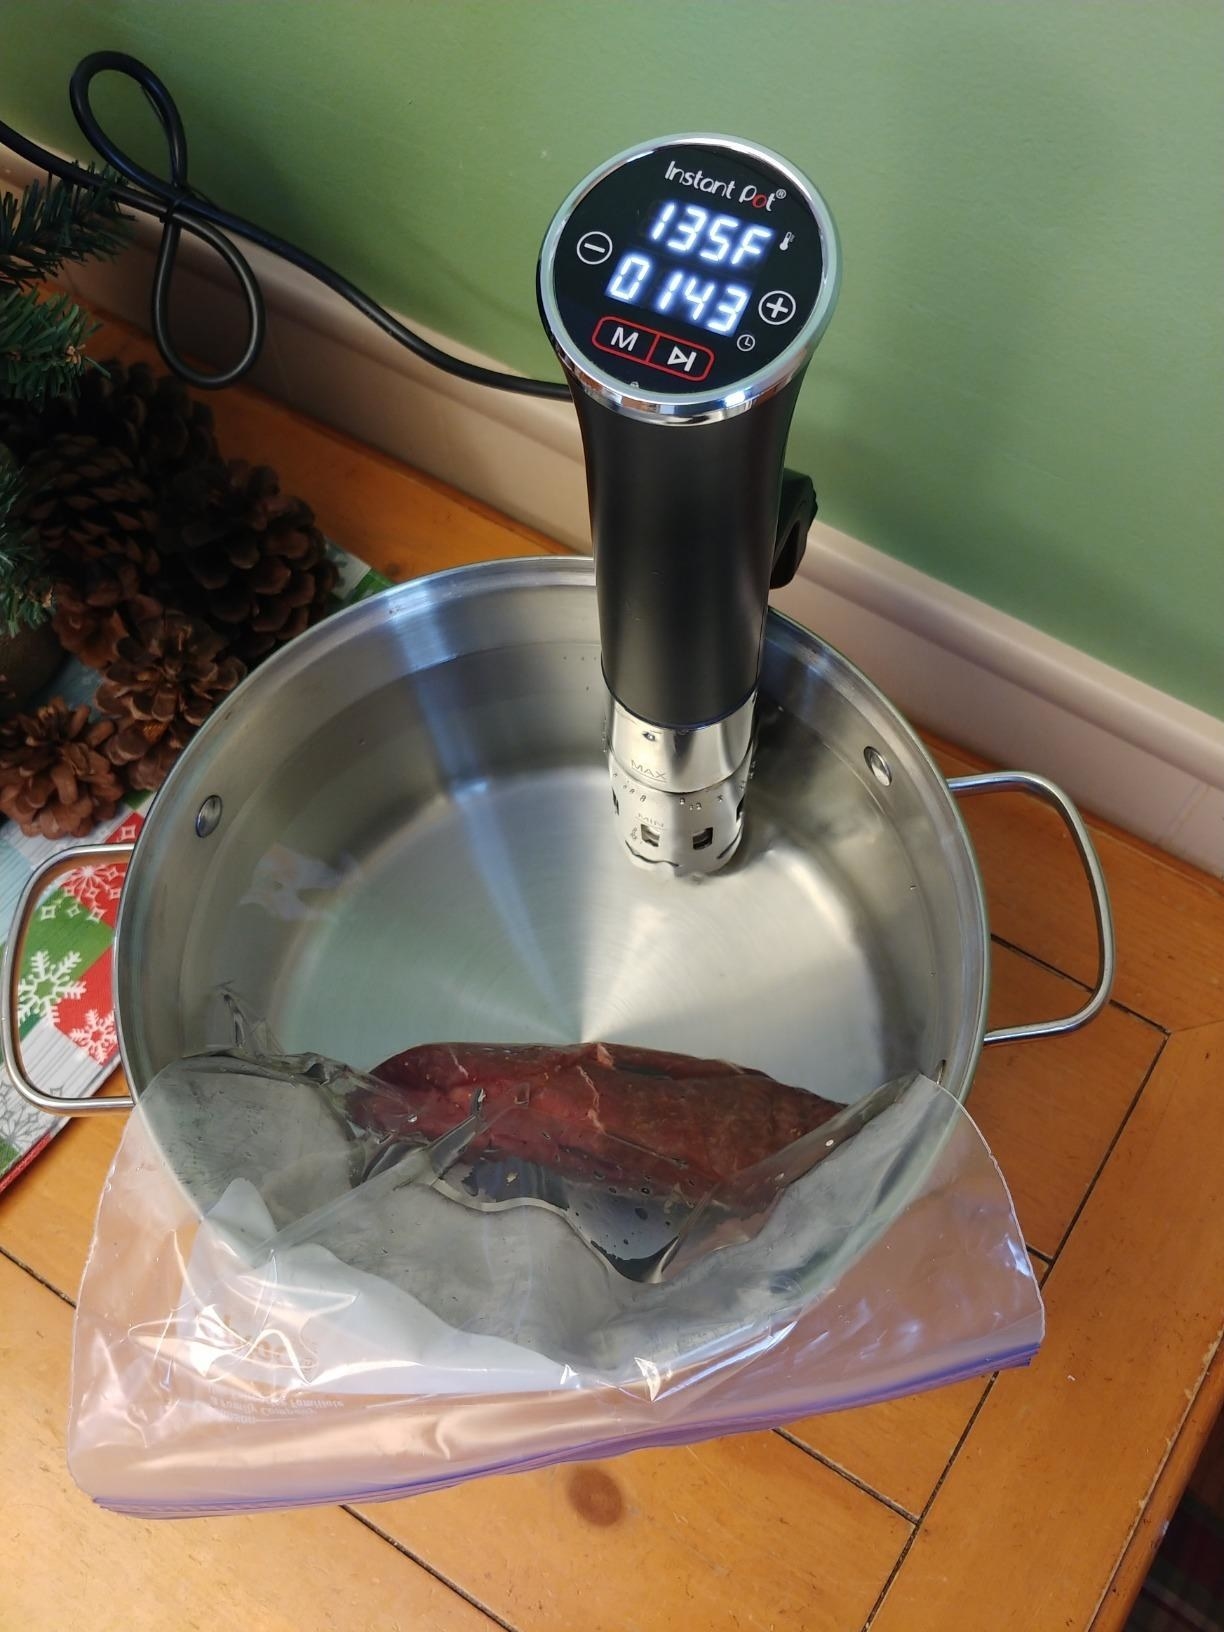 The sous vide immersion circulator in a pot with a bag of meat